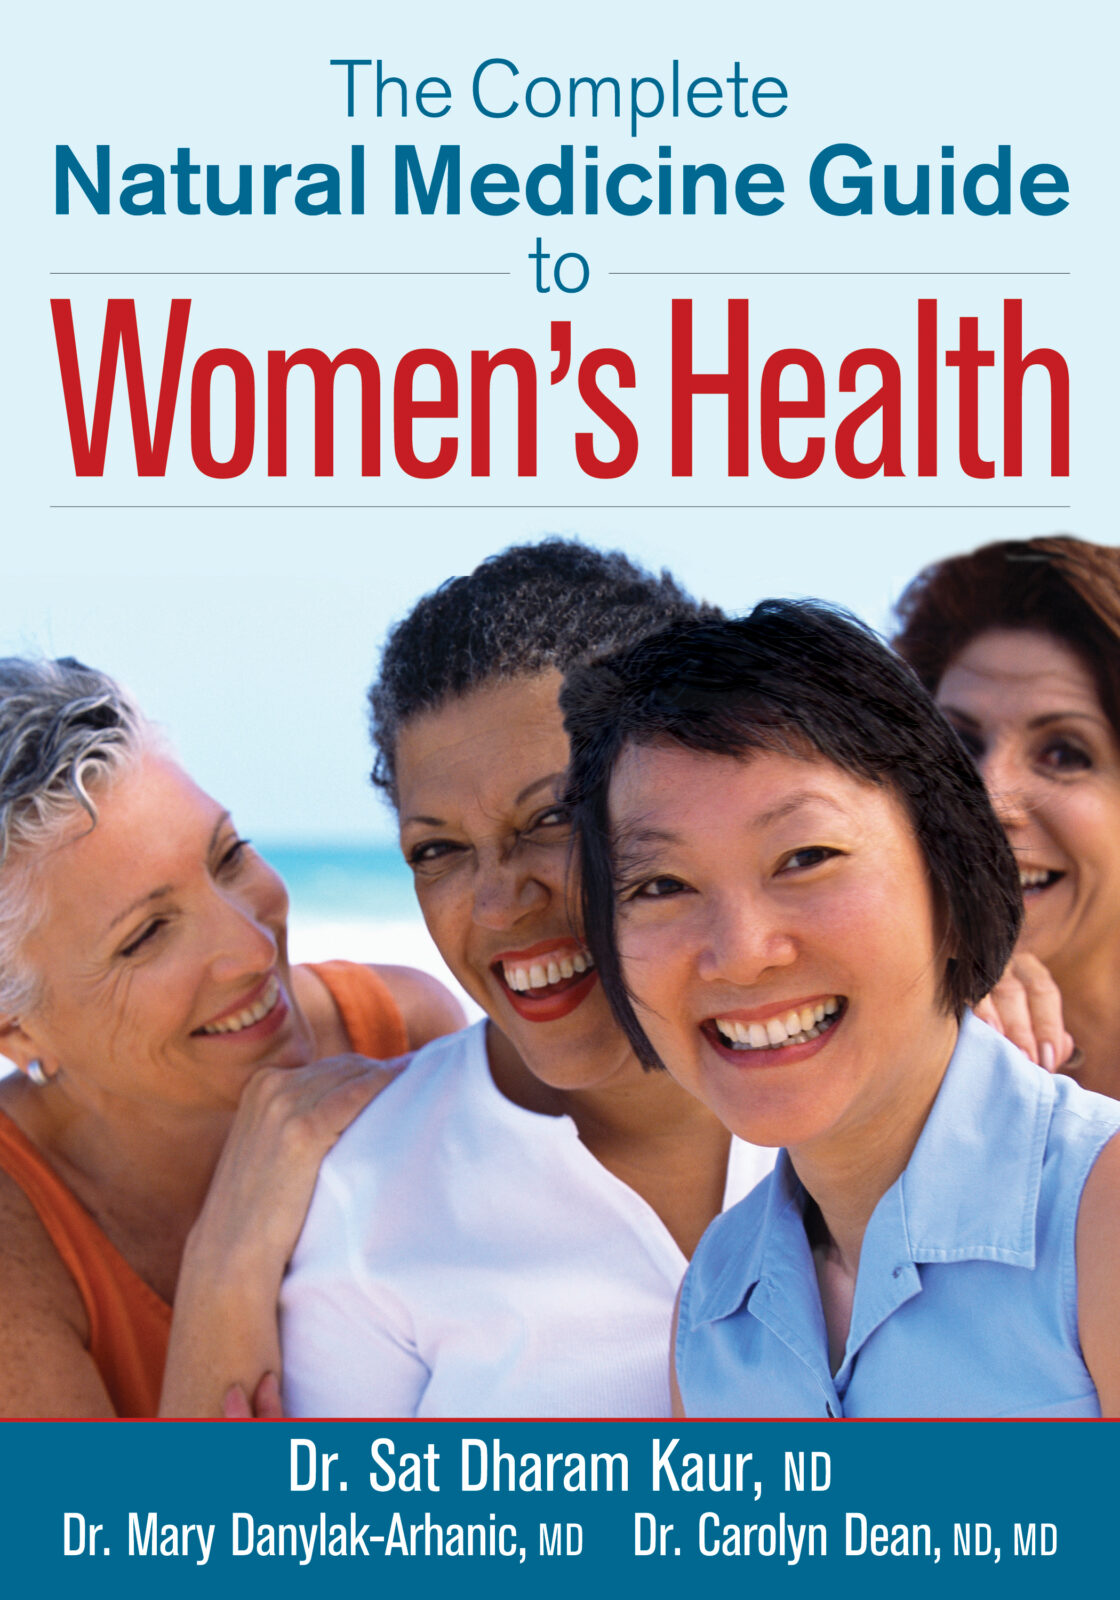 The Complete Natural Medicine Guide to Women’s Health